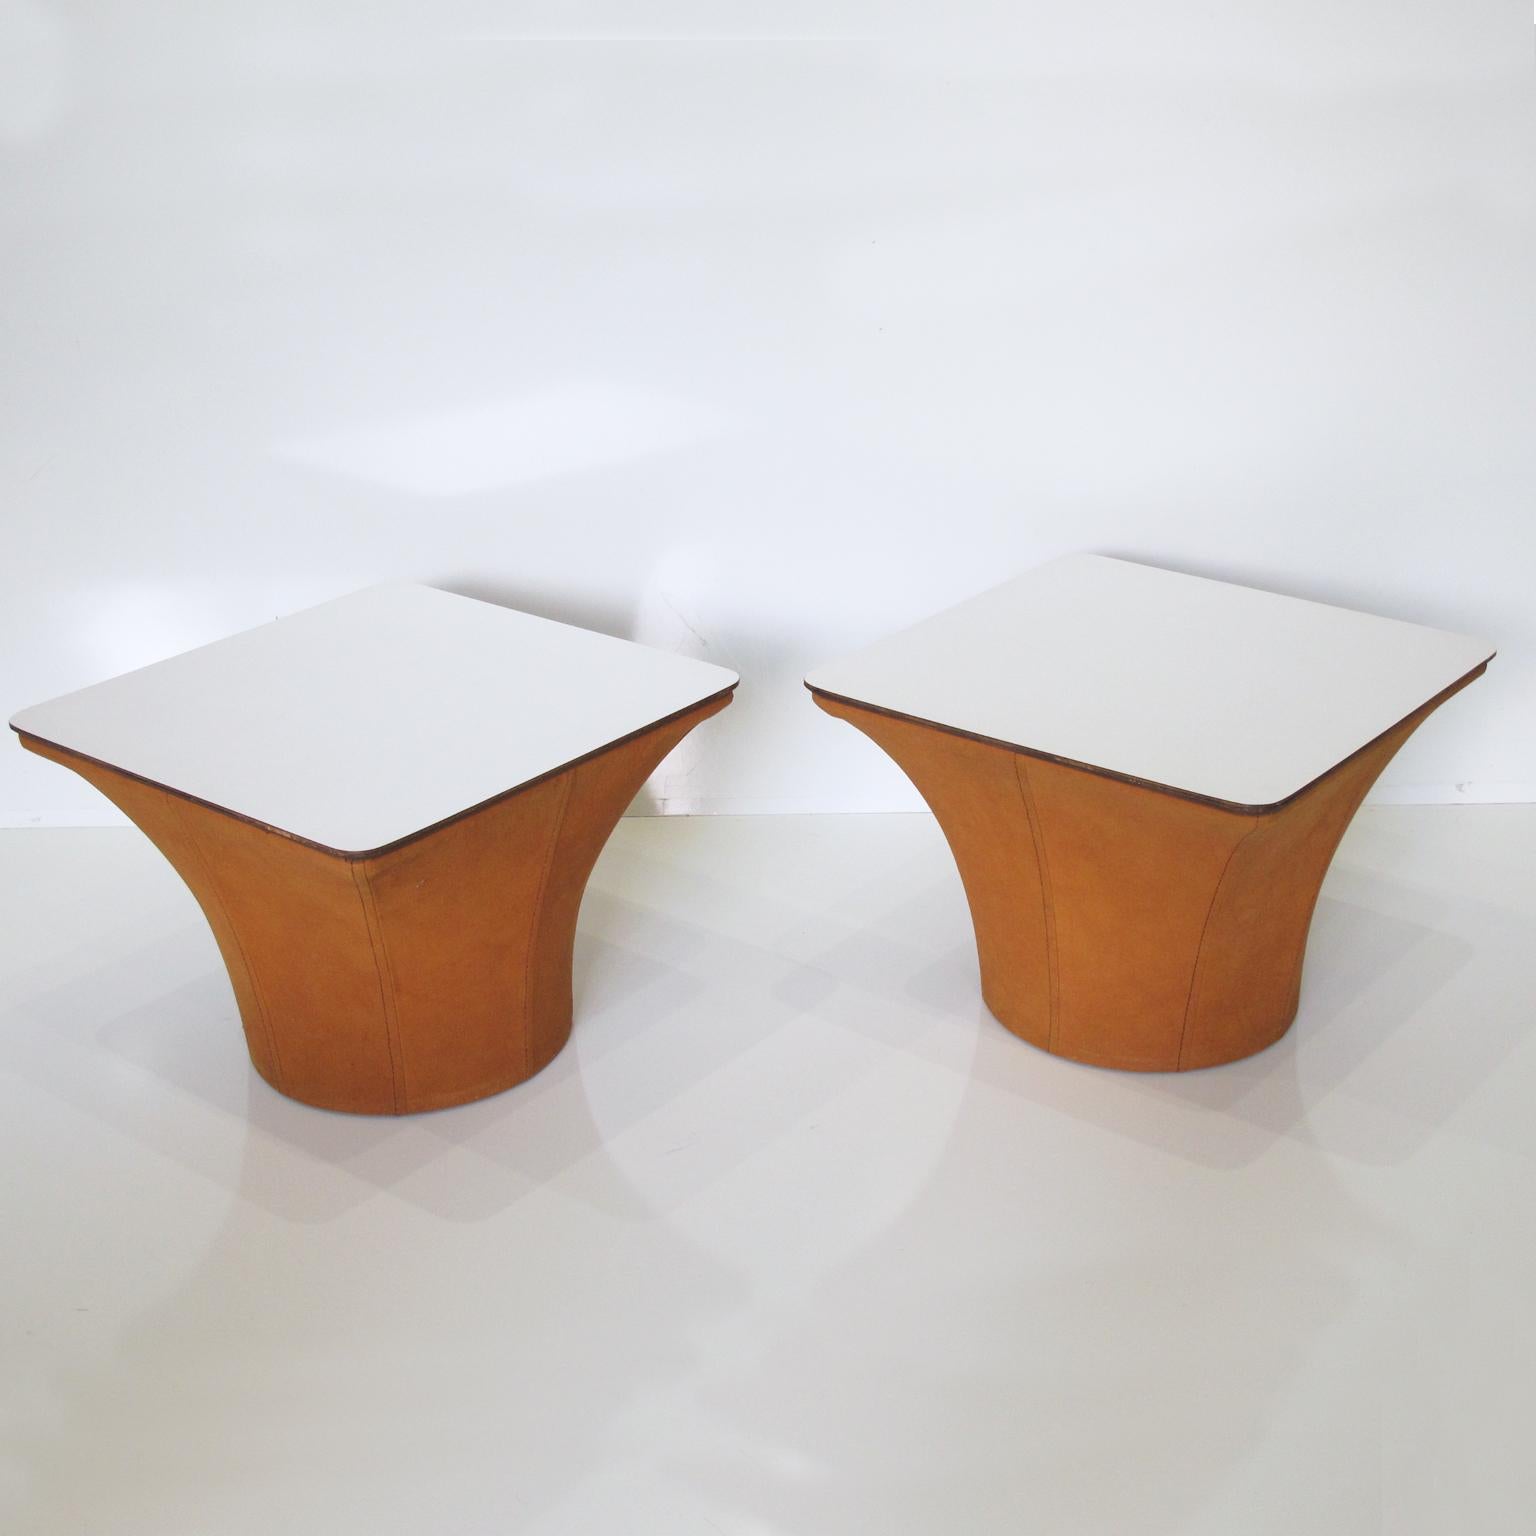 Lovely pair of Mid-Century Modern mushroom side tables. Perfect Minimalist design and shape for end sofa tables or nightstands use. Featuring original suede fabric in cognac color base and white laminate square tray tabletop.
Measures: 19.69 in.